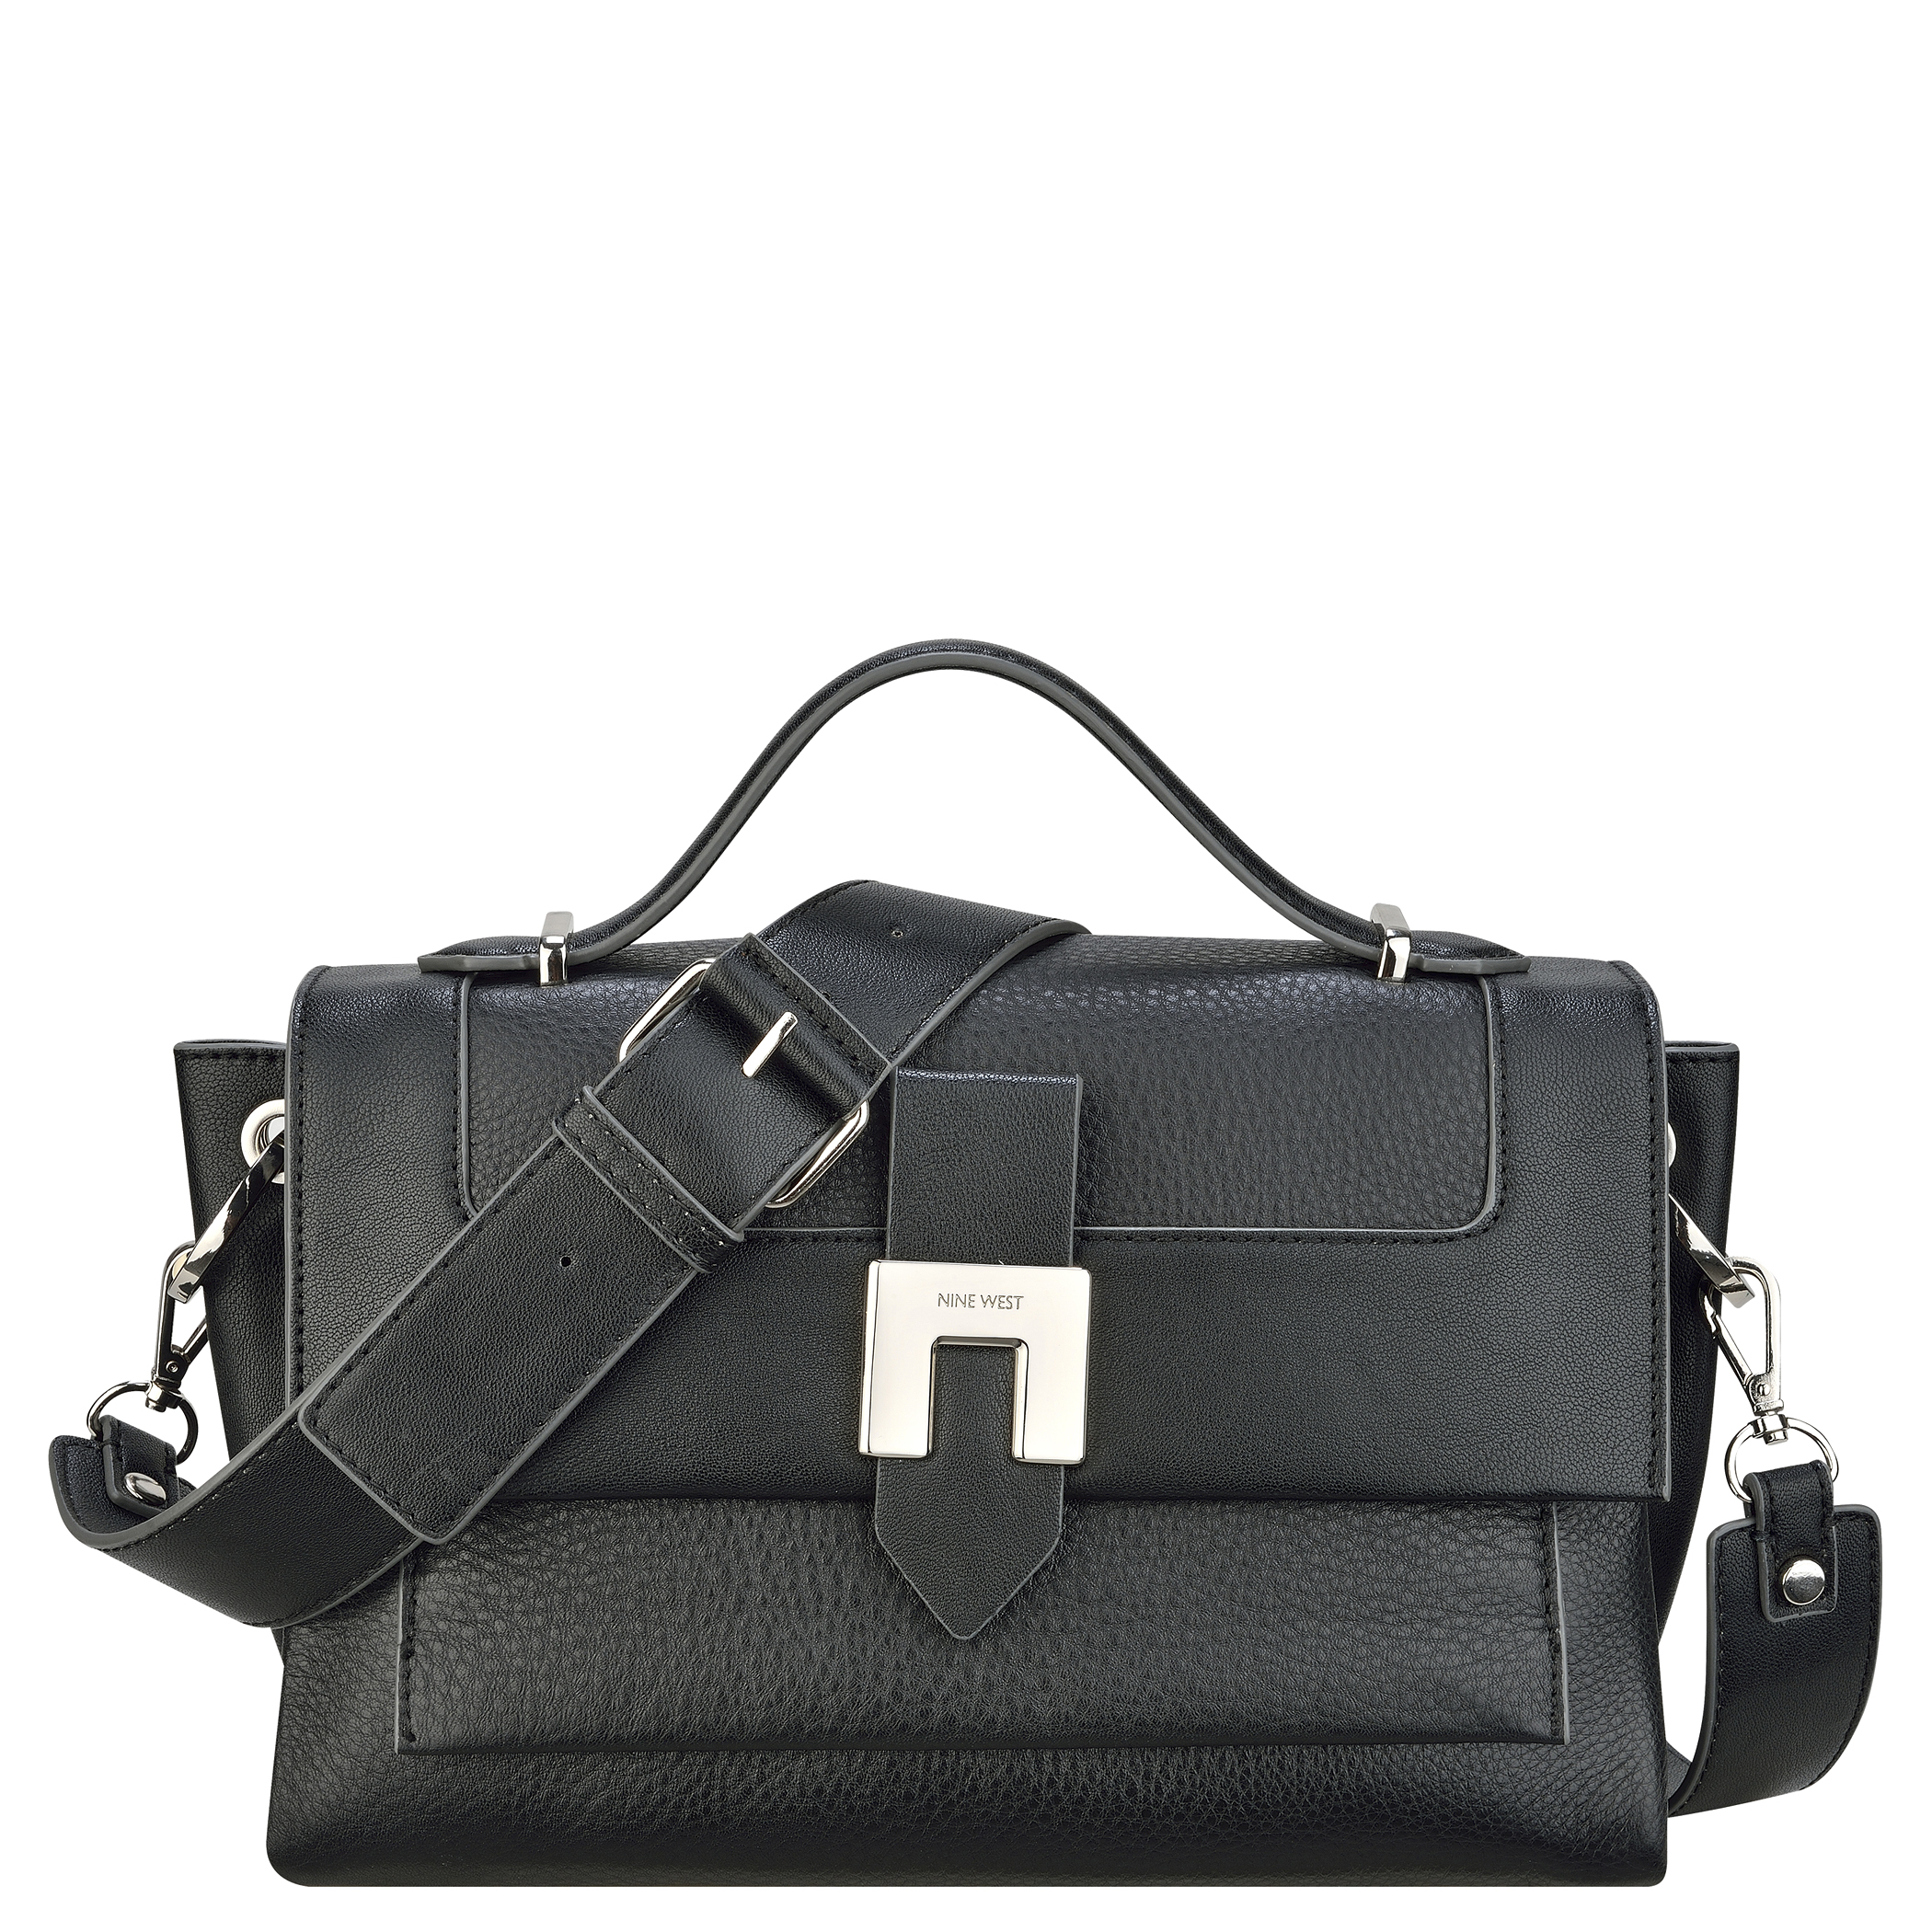 Nine west Marcy Leather Crossbody Bag in Black (BLACK LEATHER) | Lyst